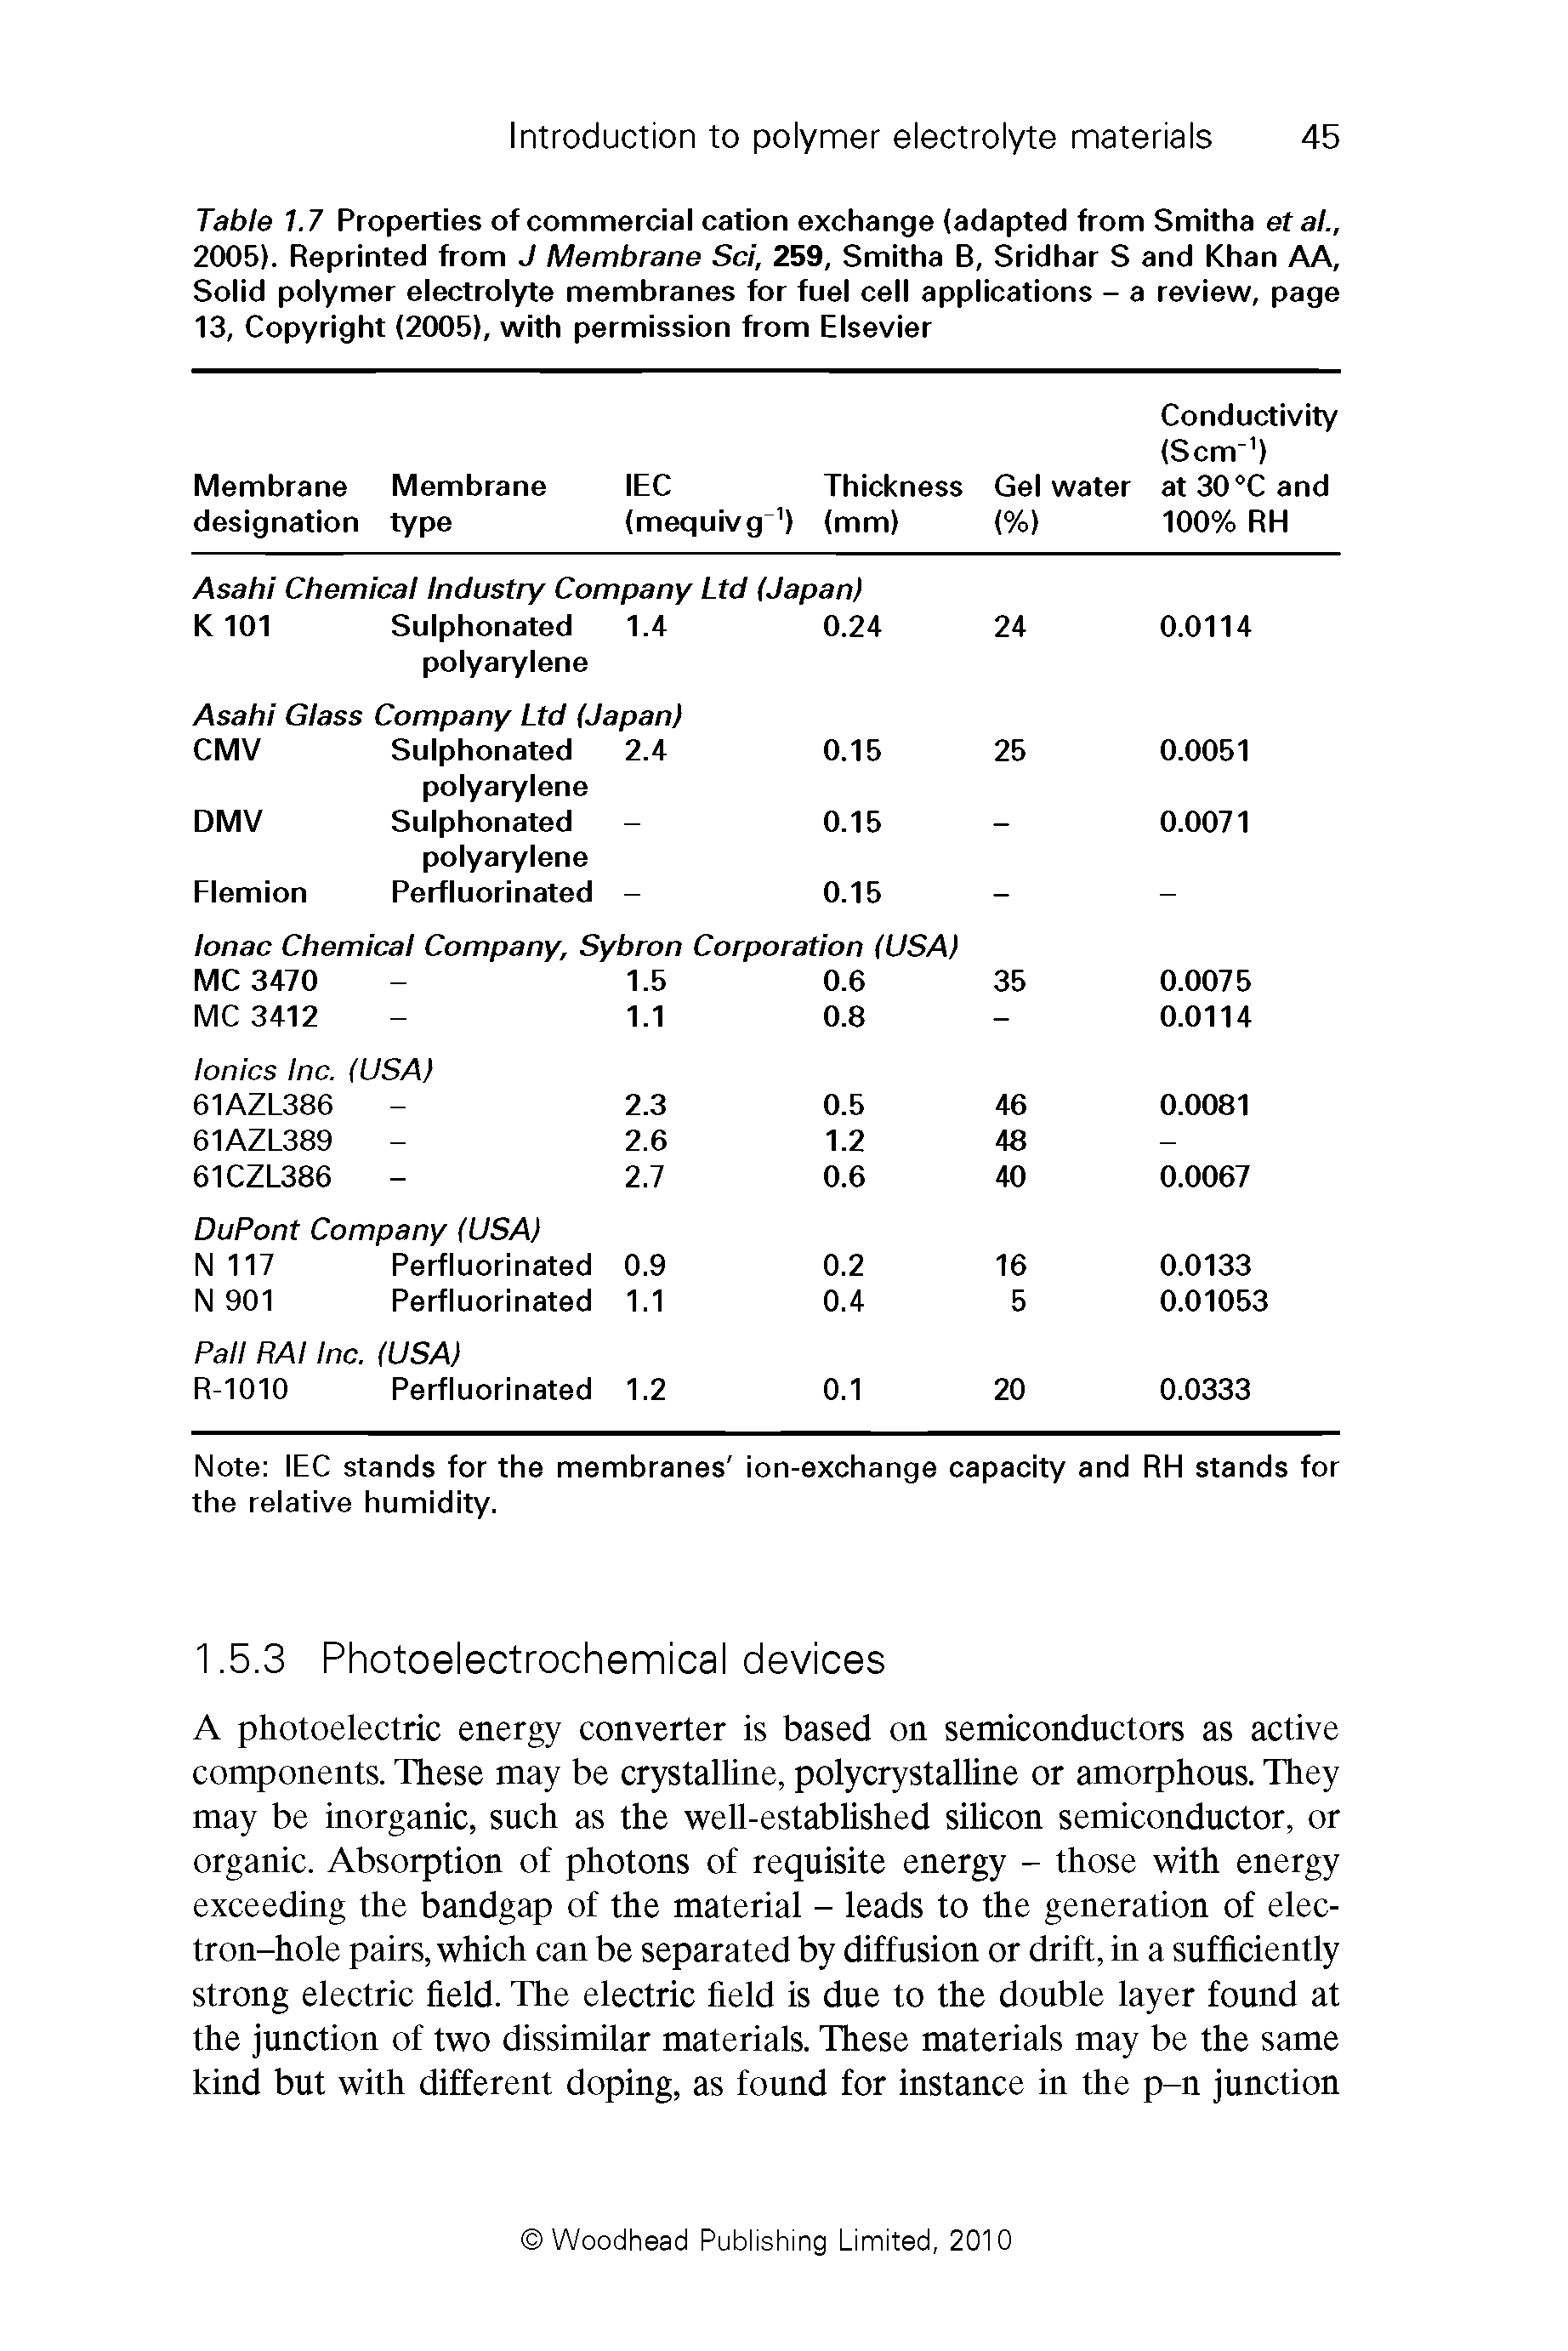 Table 1.7 Properties of commercial cation exchange (adapted from Smitha eta ., 2005). Reprinted from J Membrane Sci, 259, Smitha B, Sridhar S and Khan AA, Solid polymer electrolyte membranes for fuel cell applications - a review, page 13, Copyright (2005), with permission from Elsevier...